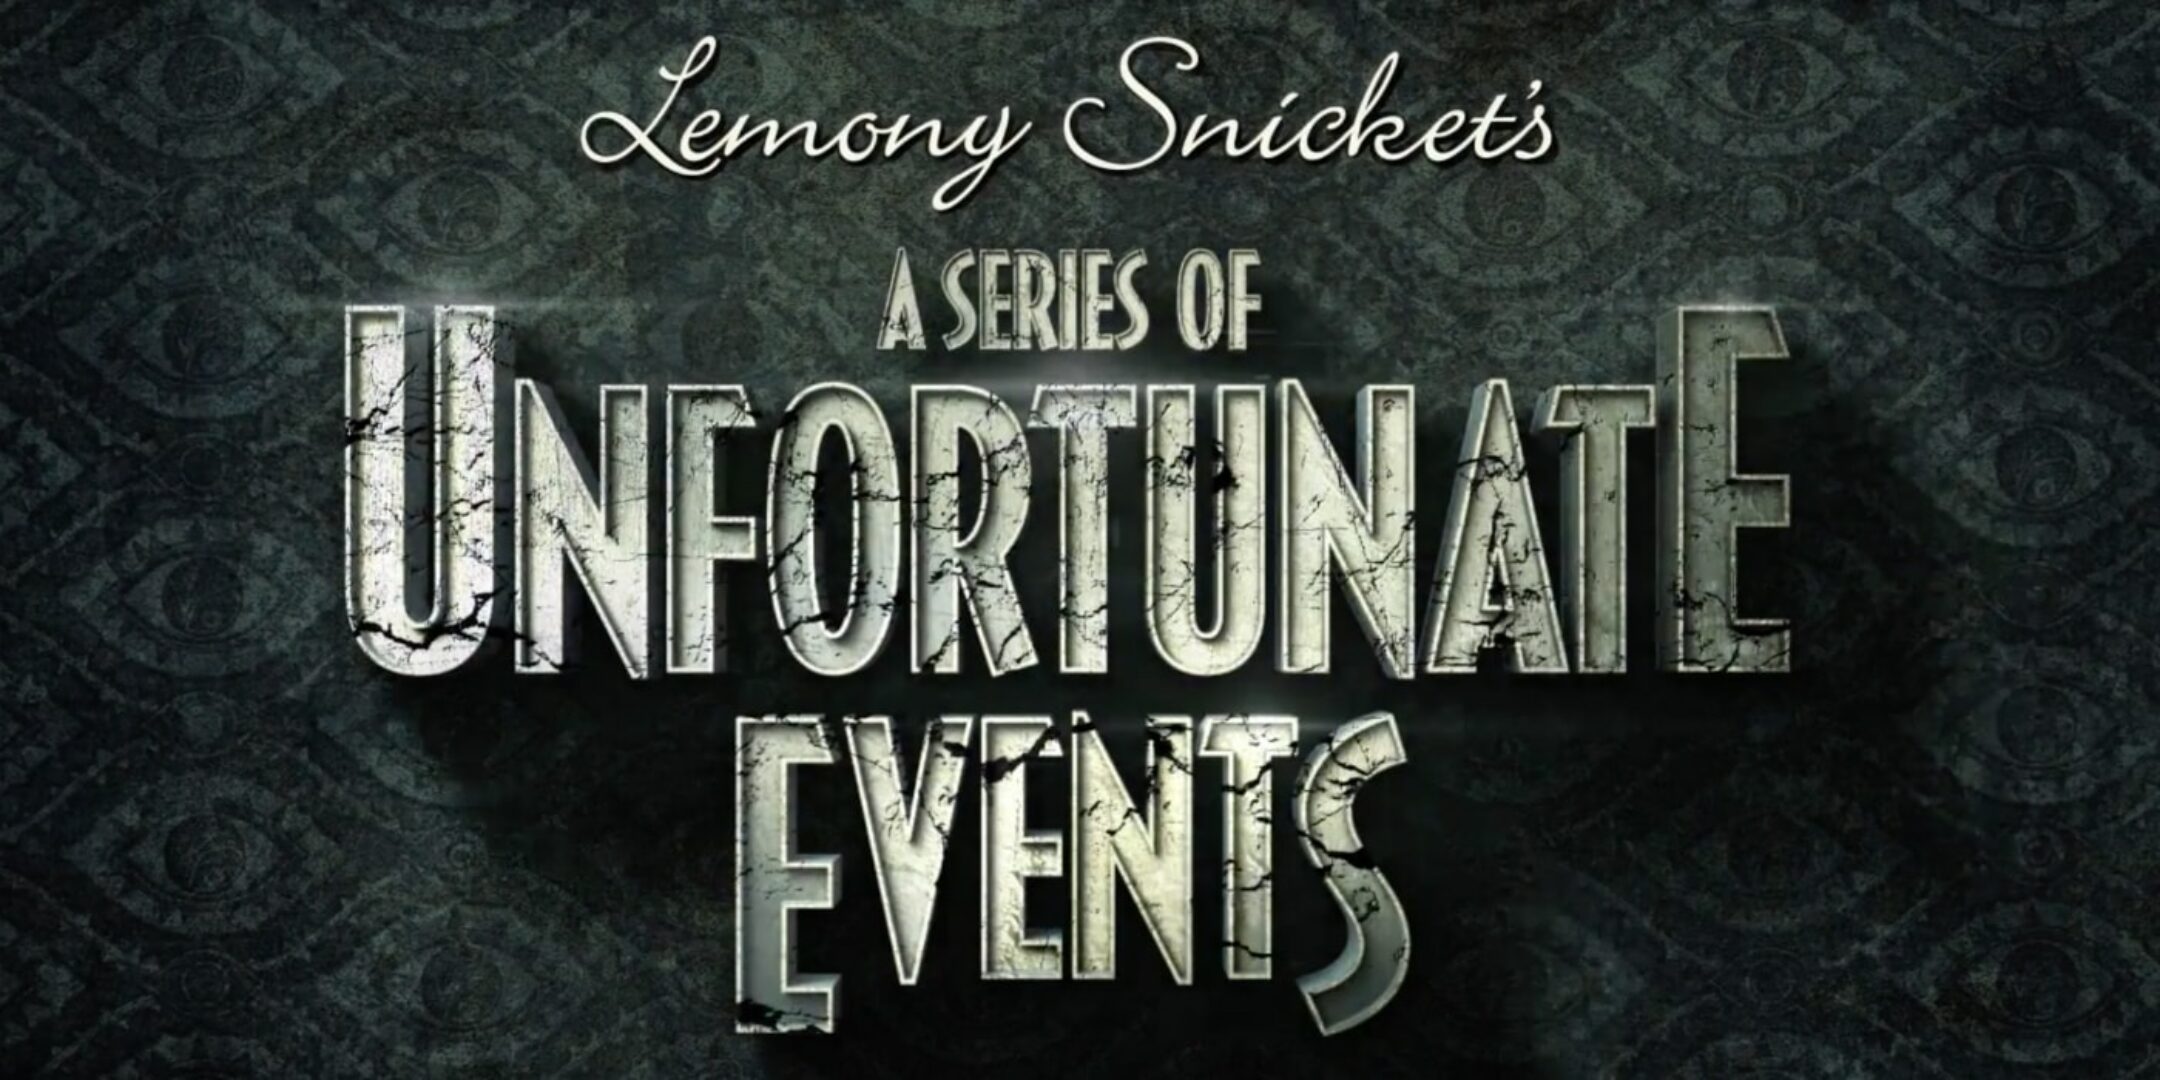 Netflix's A Series of Unfortunate Events